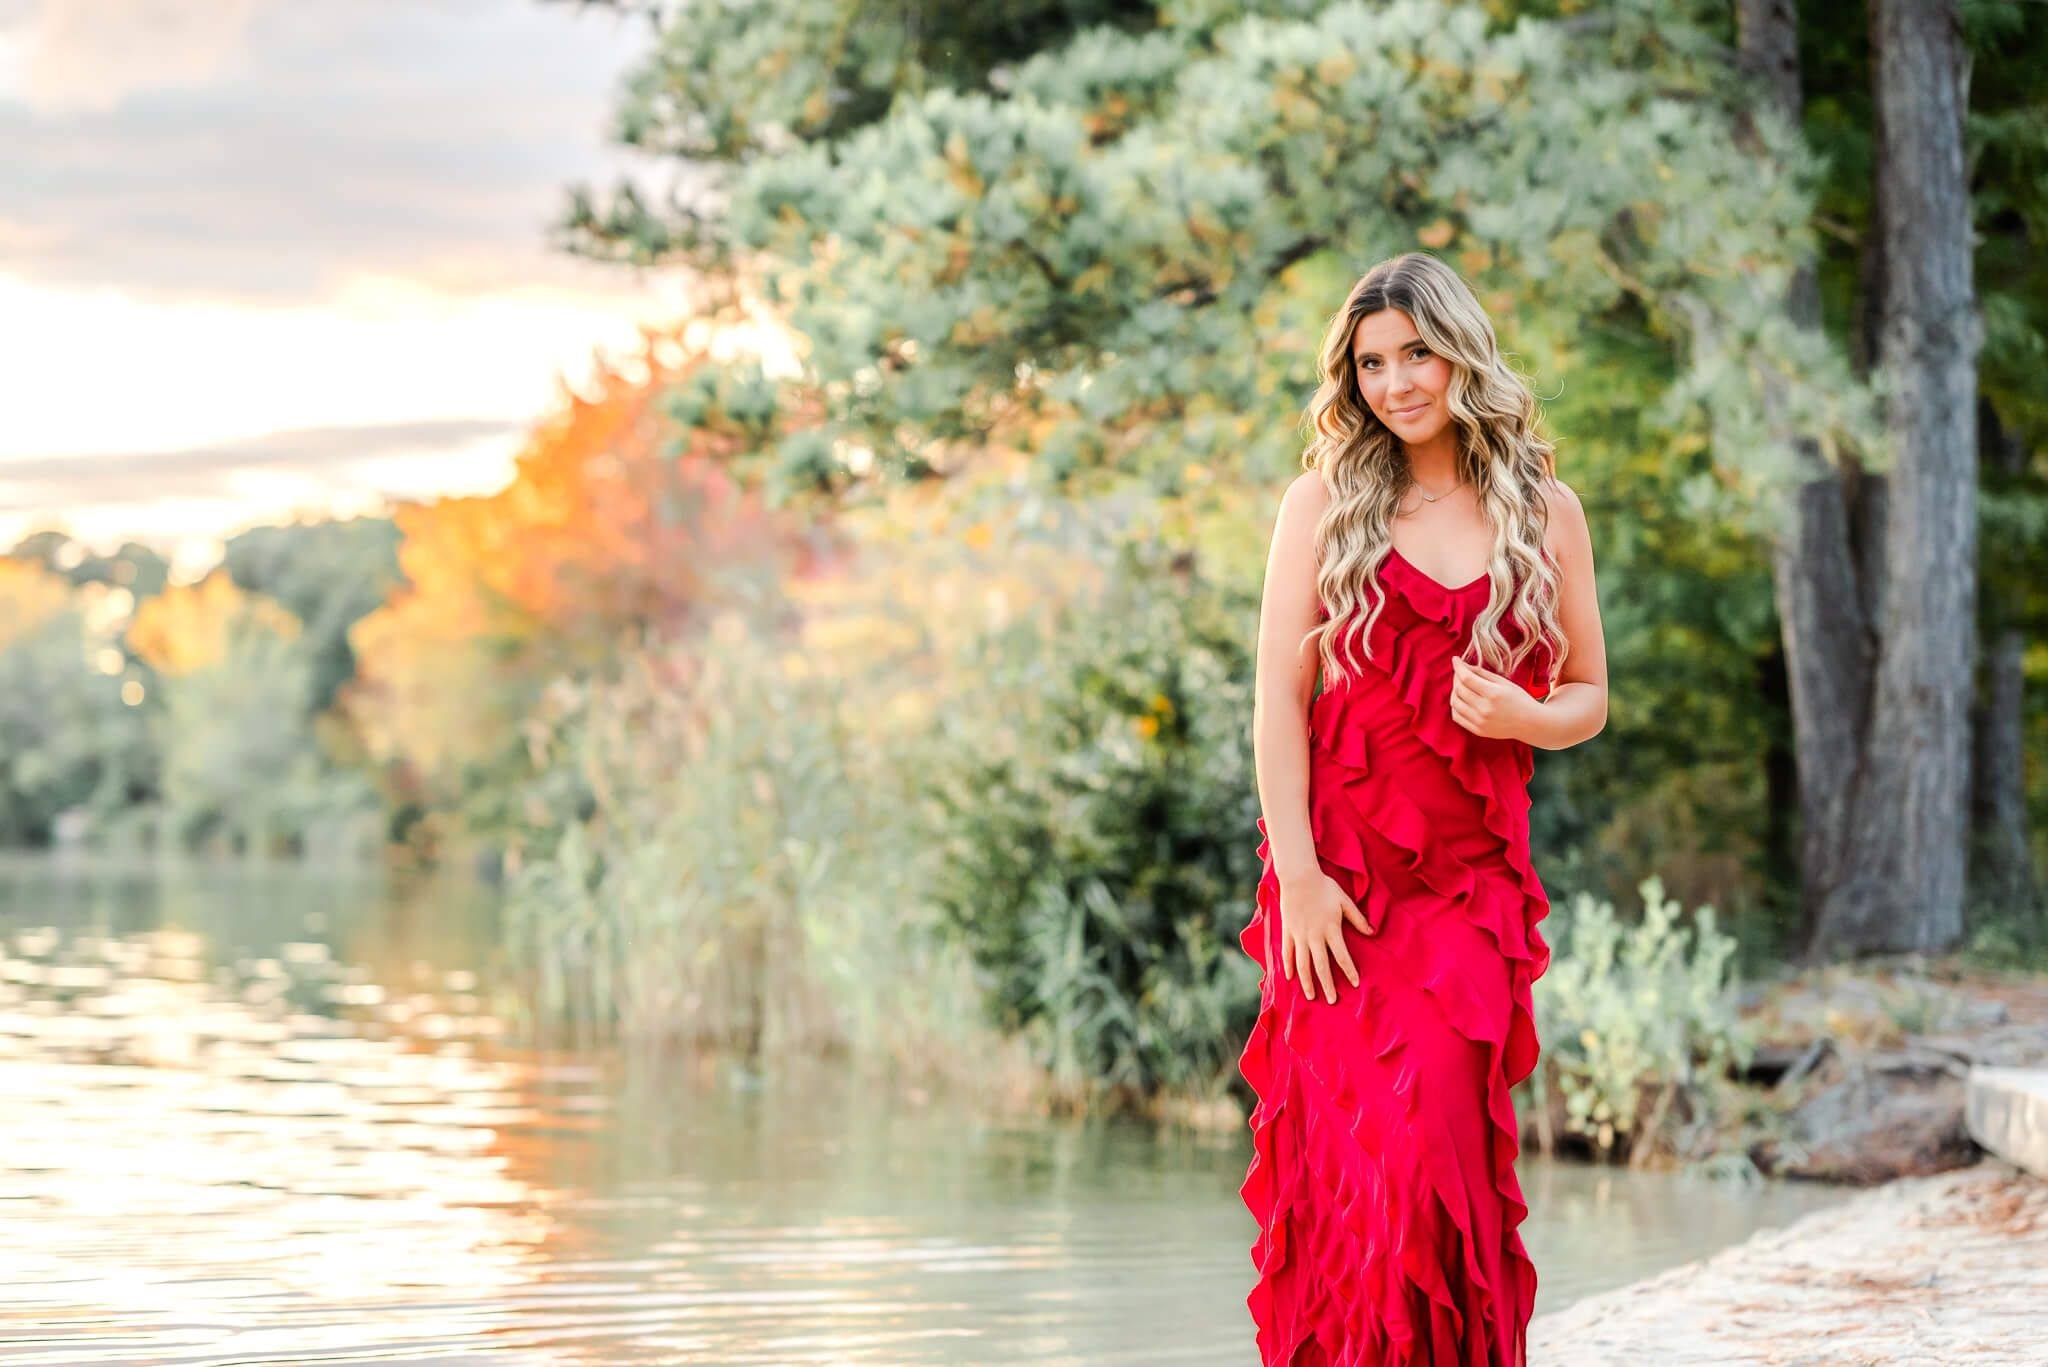 A high school senior stands by a lake at sunset. The glowing sky shows off the just turning fall leaves. She wears a red dress that could be found at All the Rage.